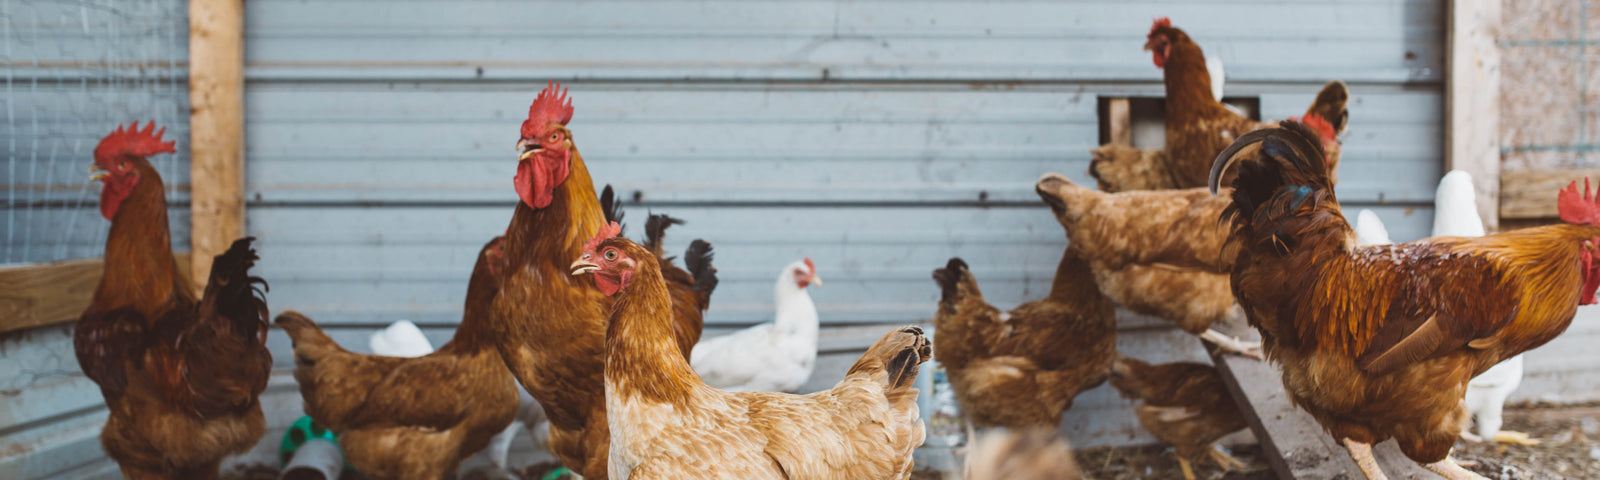 Mild, Moderate, and Severe Stress in Chickens